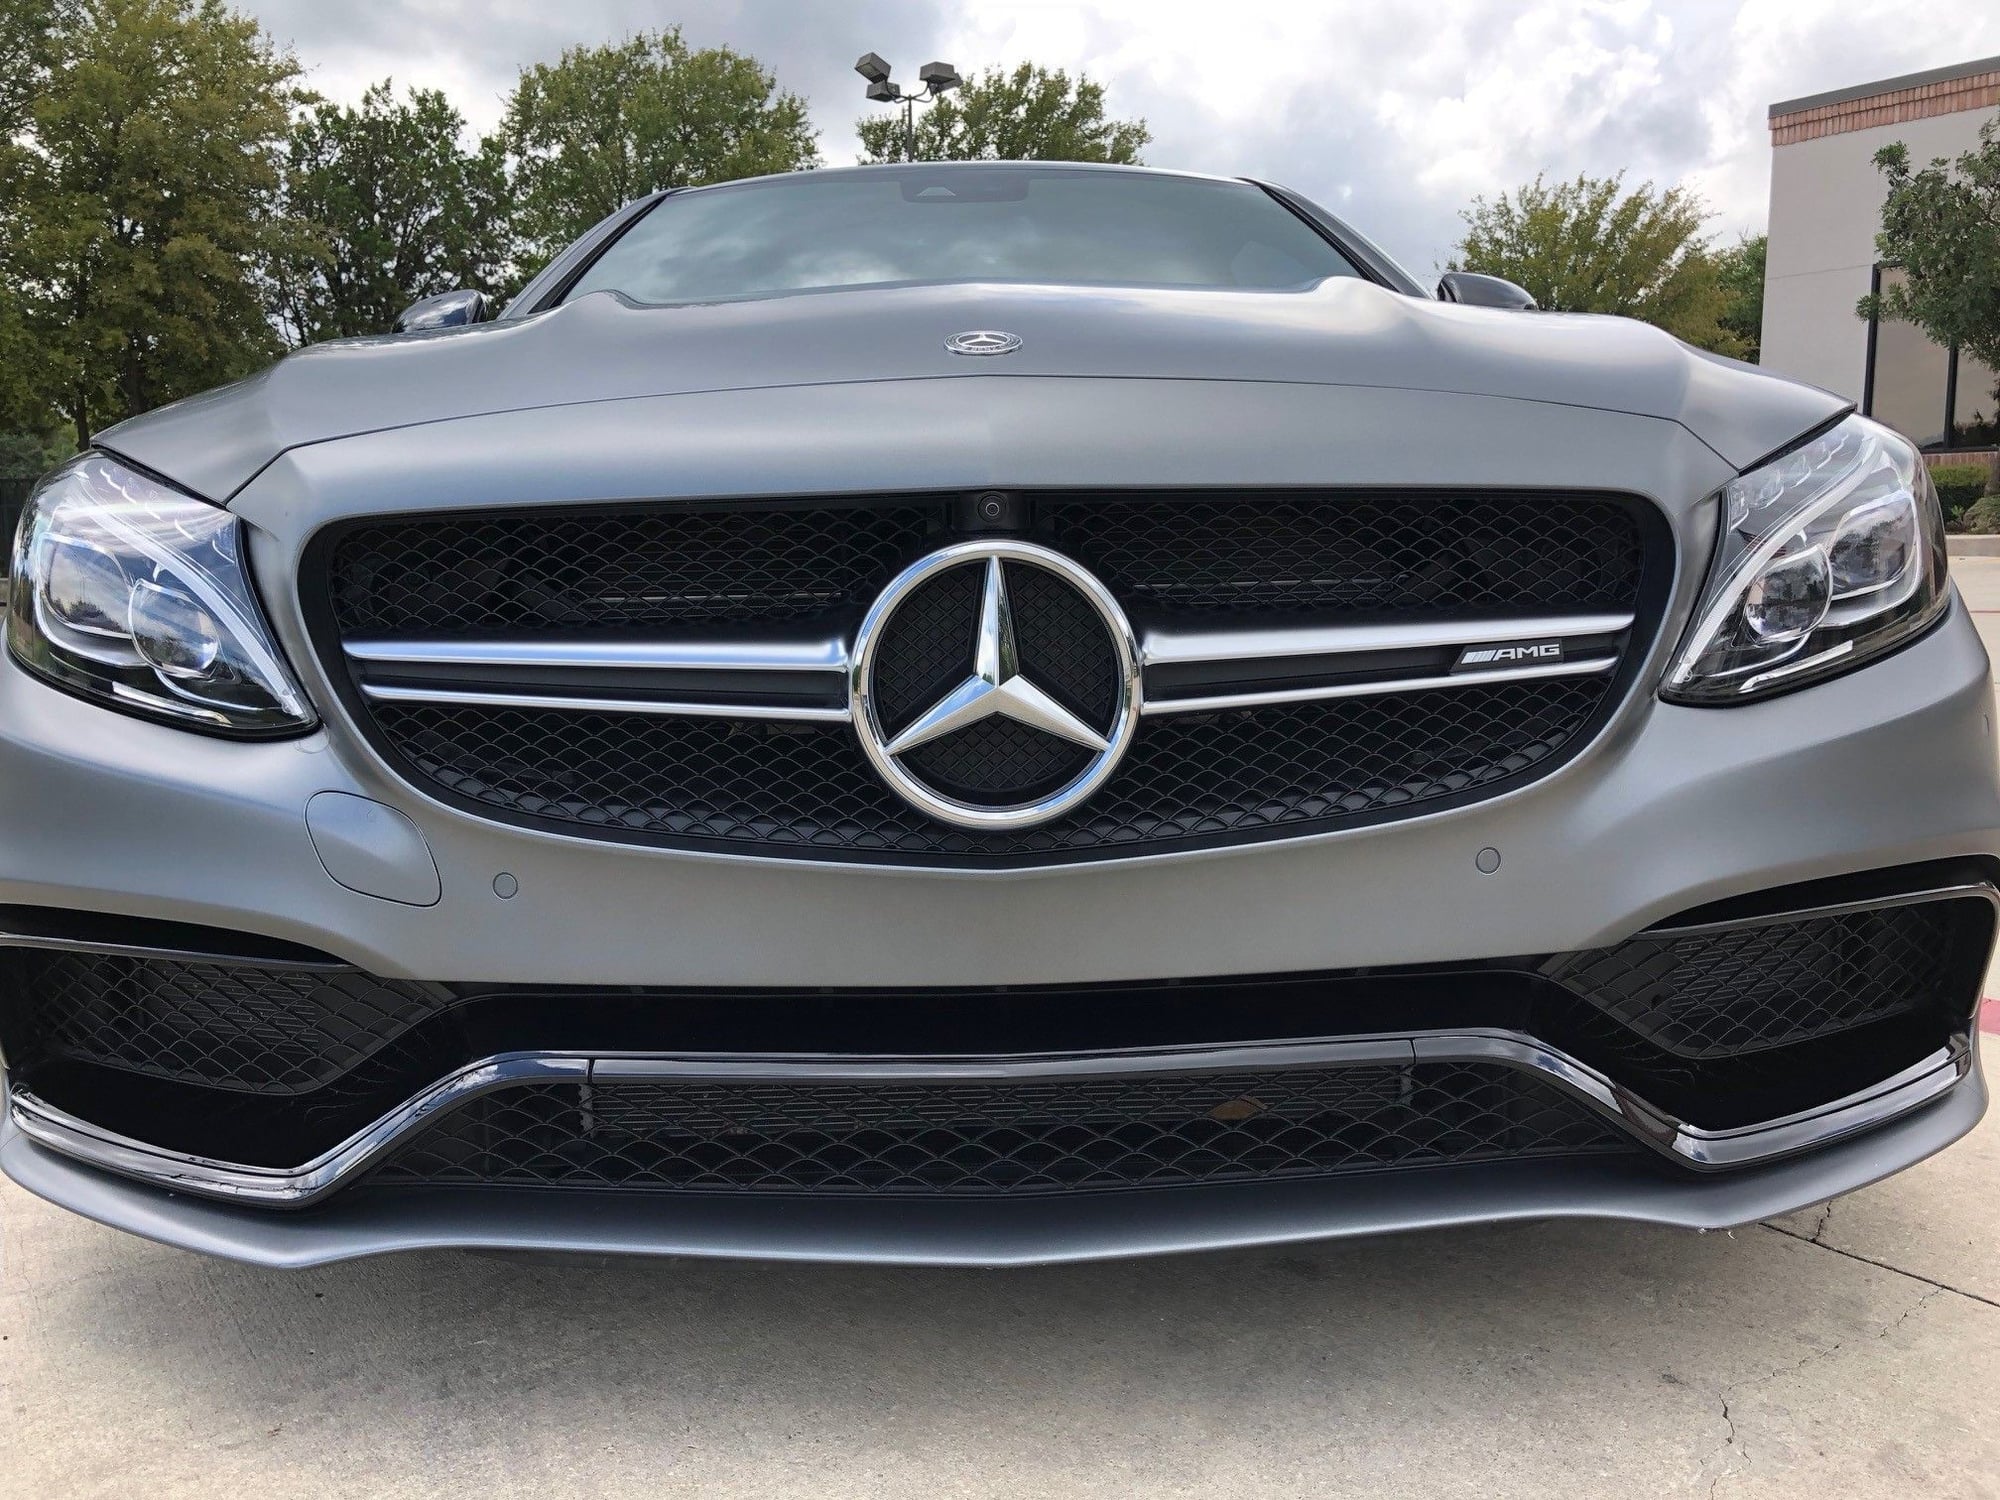 2018 Mercedes-Benz C63 AMG S - 2018 Mercedes Benz C63 S AMG Grey Magno Coupe $5k in XPEL PPF Tint Power upgrade - Used - VIN WDDWJ8HB8JF644670 - 4,600 Miles - 8 cyl - 2WD - Automatic - Coupe - Gray - San Antonio, TX 78248, United States